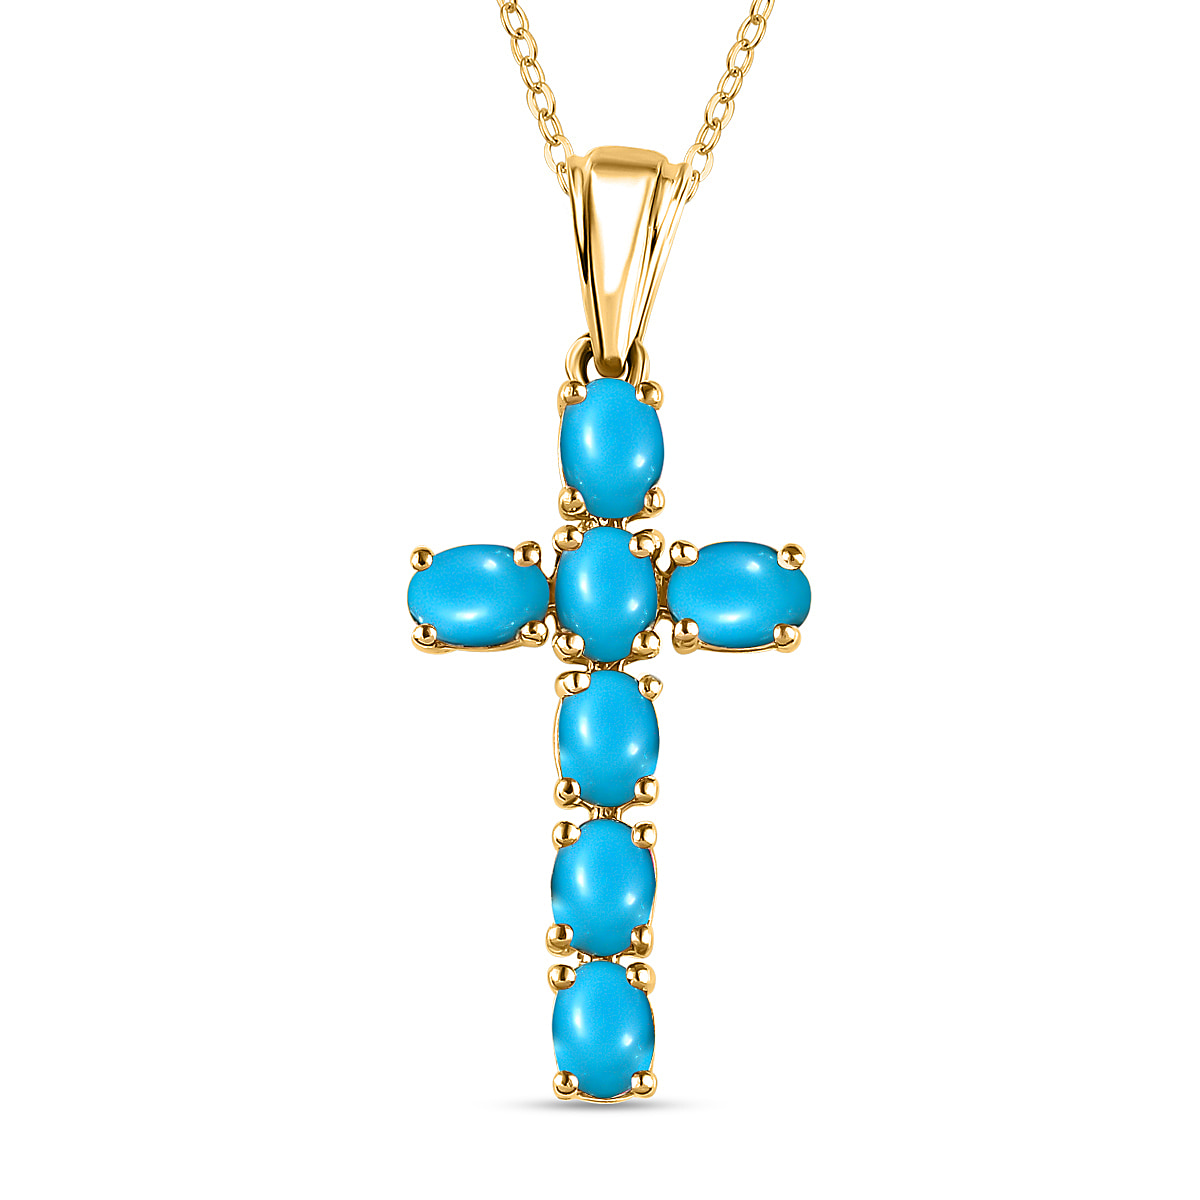 Sleeping Beauty Turquoise Cross Pendant with Chain (Size 20 Inch